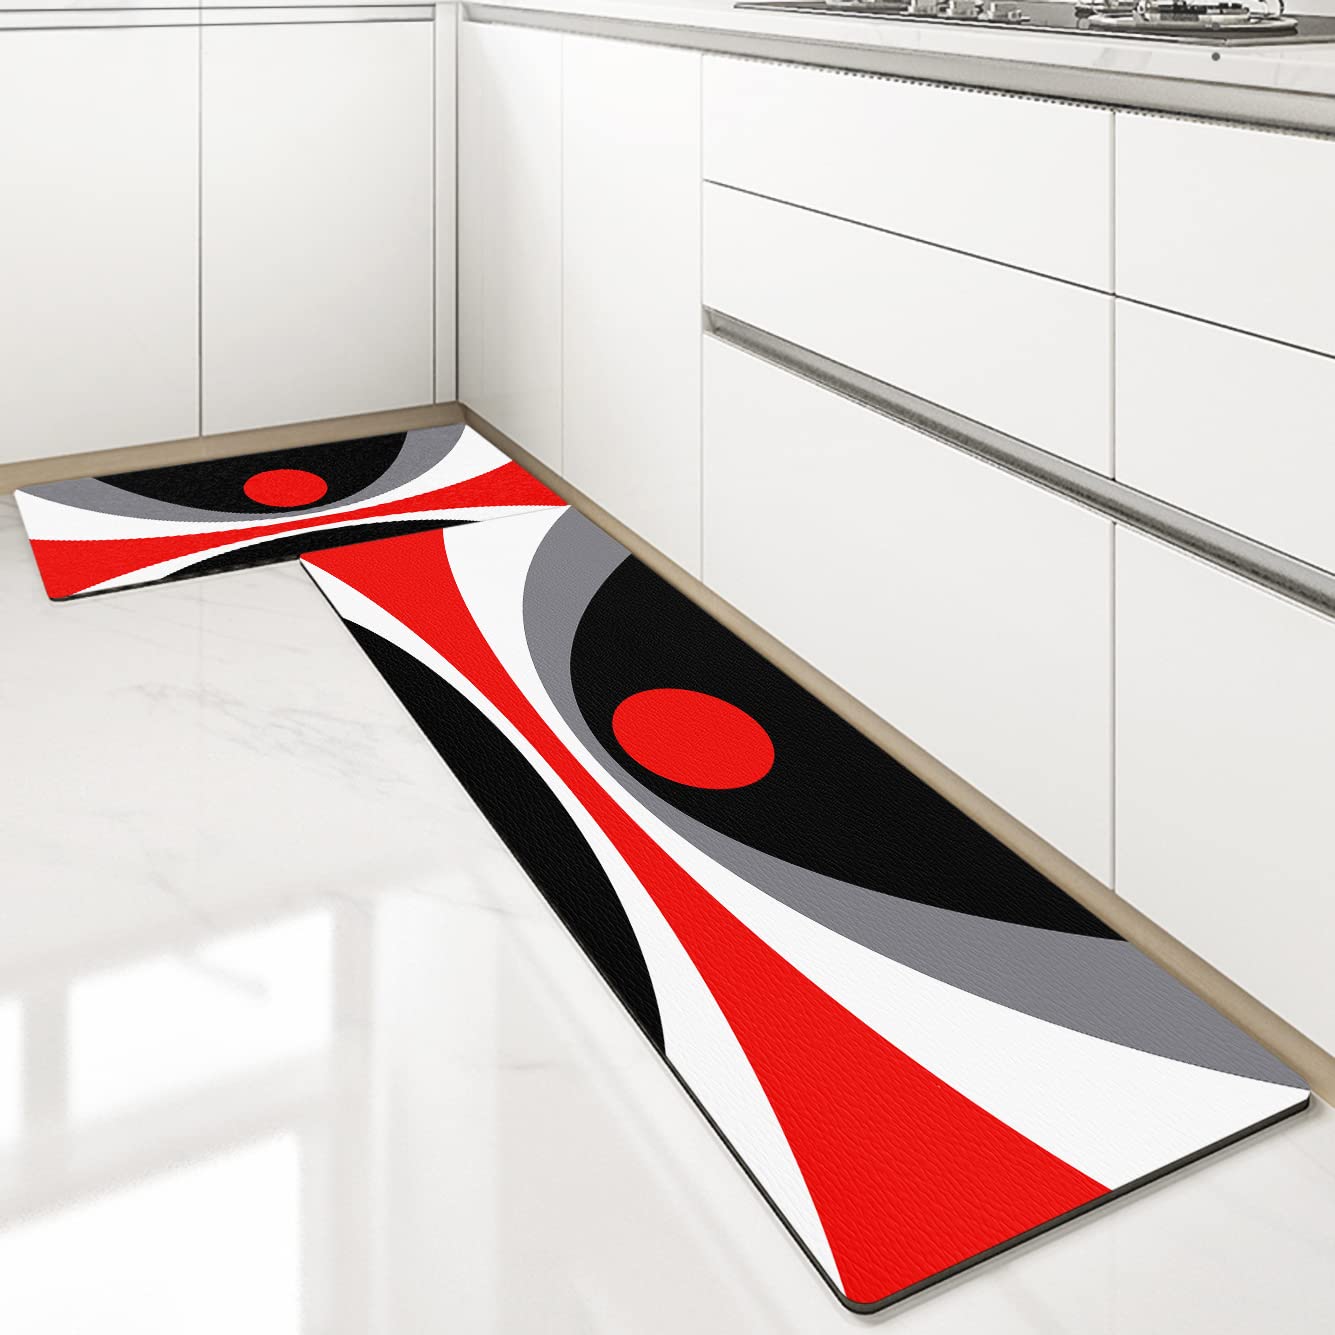 Red and Black Kitchen Rugs and Mats Abstract Art Kitchen Decor Set of 2 Kitchen Floor Mat Non-Slip Backing Washable Kitchen Rugs Set for Home Office Laundry (Red Black, 17"x29.5"+17"x47")